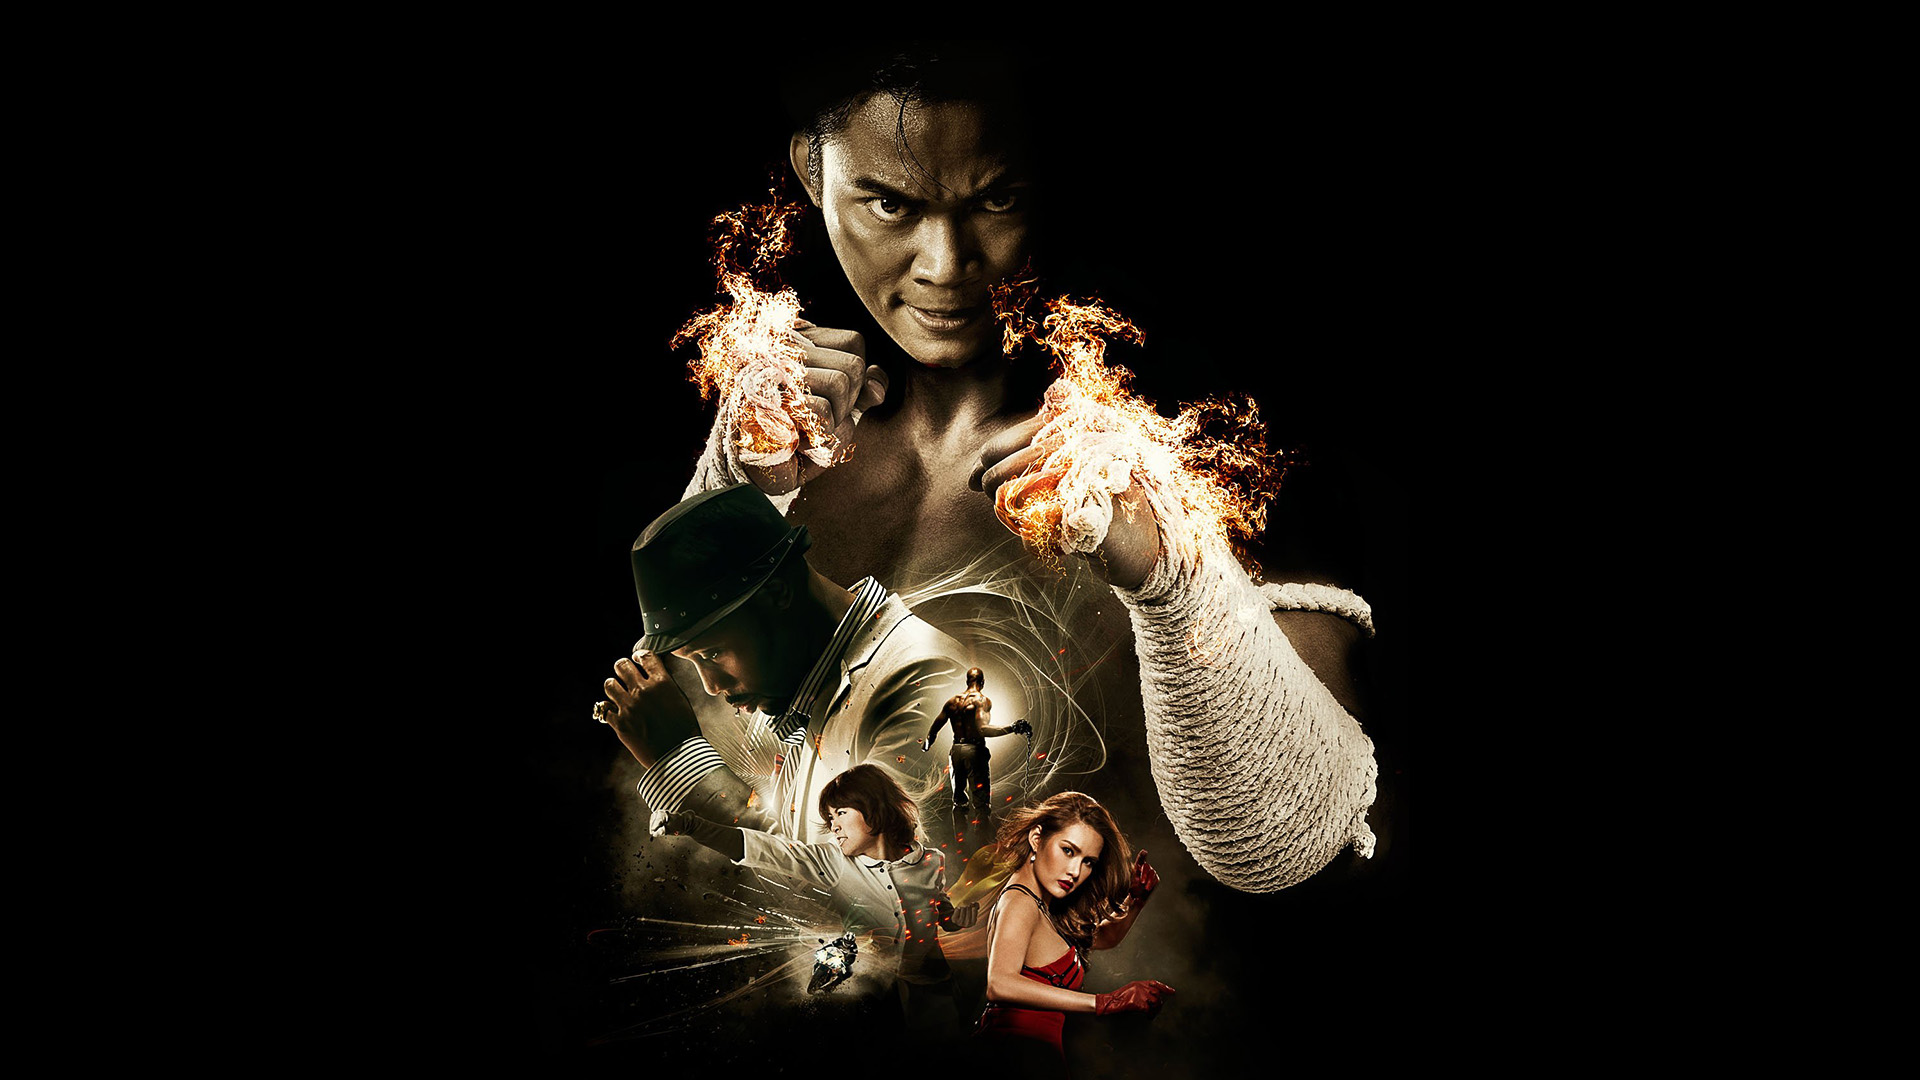 Movie The Protector 2 HD Wallpaper | Background Image